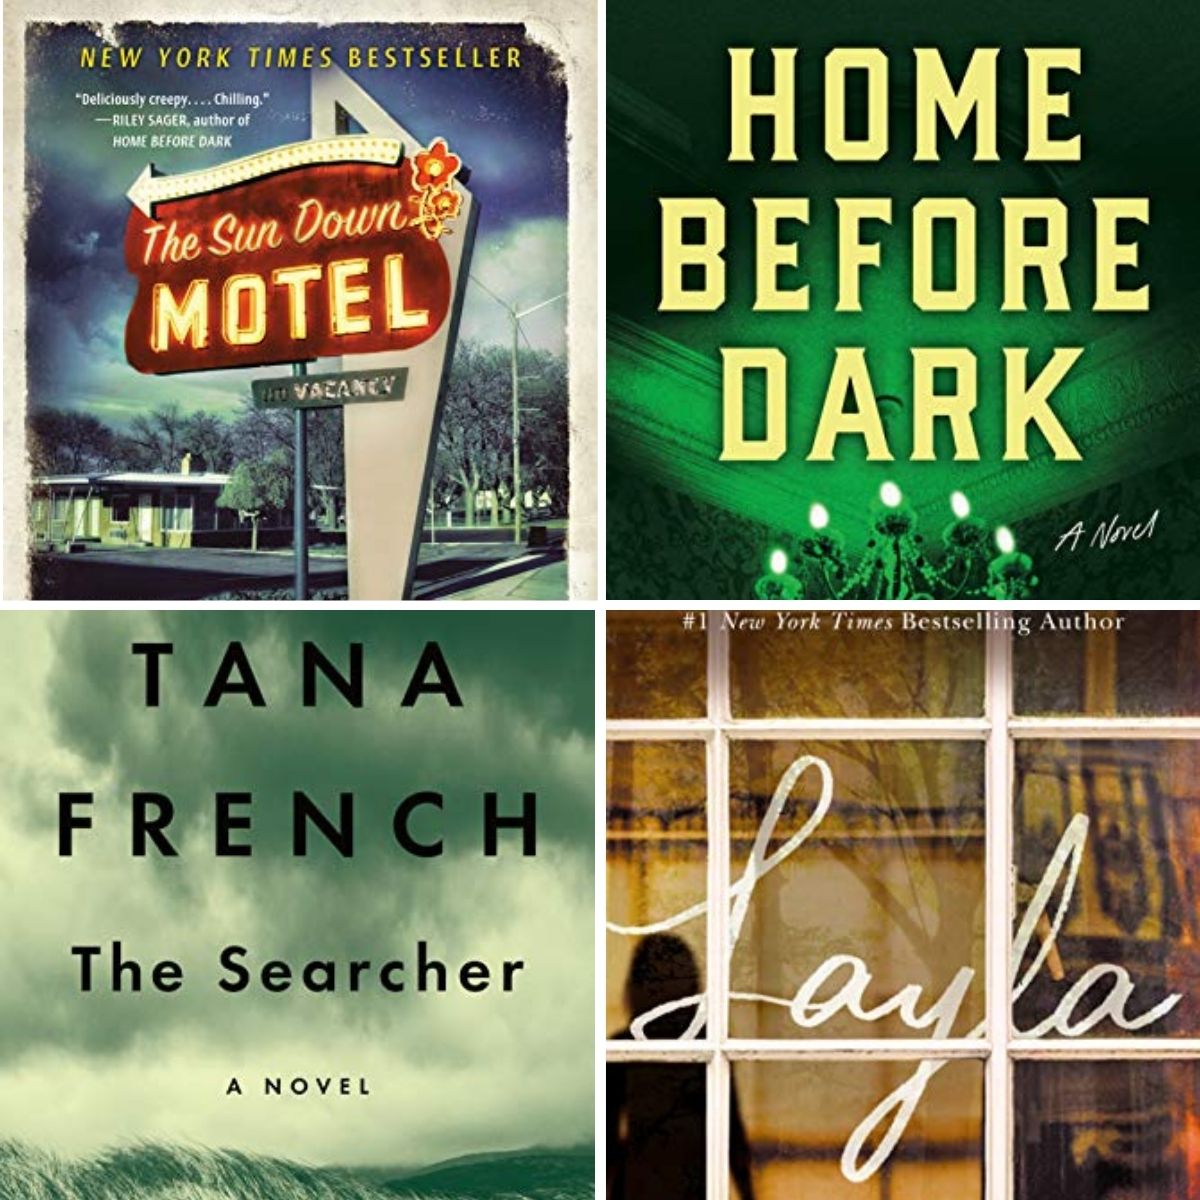 Collage of four books: The Sundown Motel, Home Before Dark, The Searcher, and The Southern Book Club's Guide to Slaying Vampires, four of the best thriller books ever.